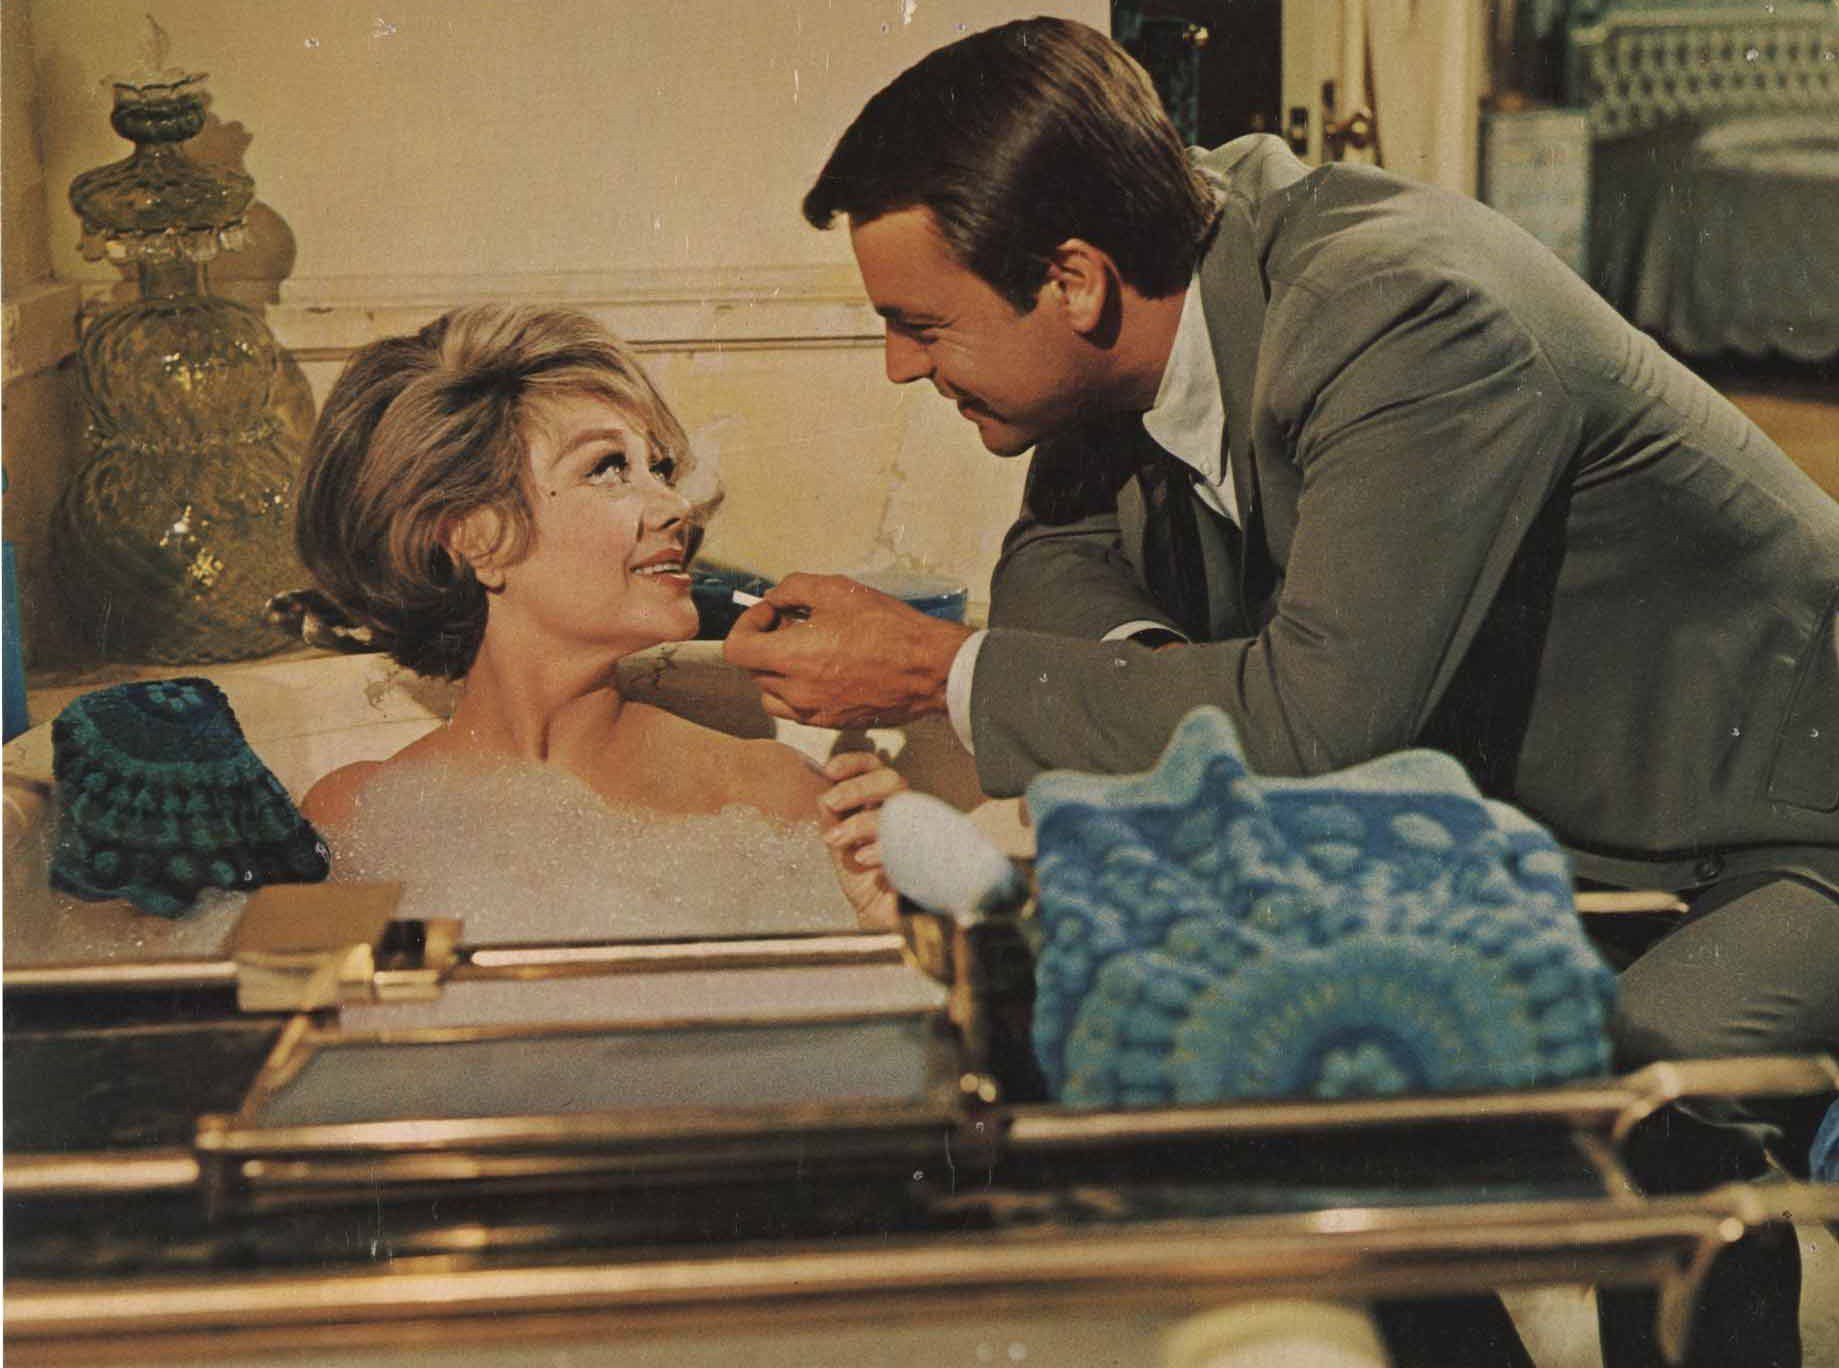 Glynis Johns - Robert Wagner Don´t just stand there! 1968